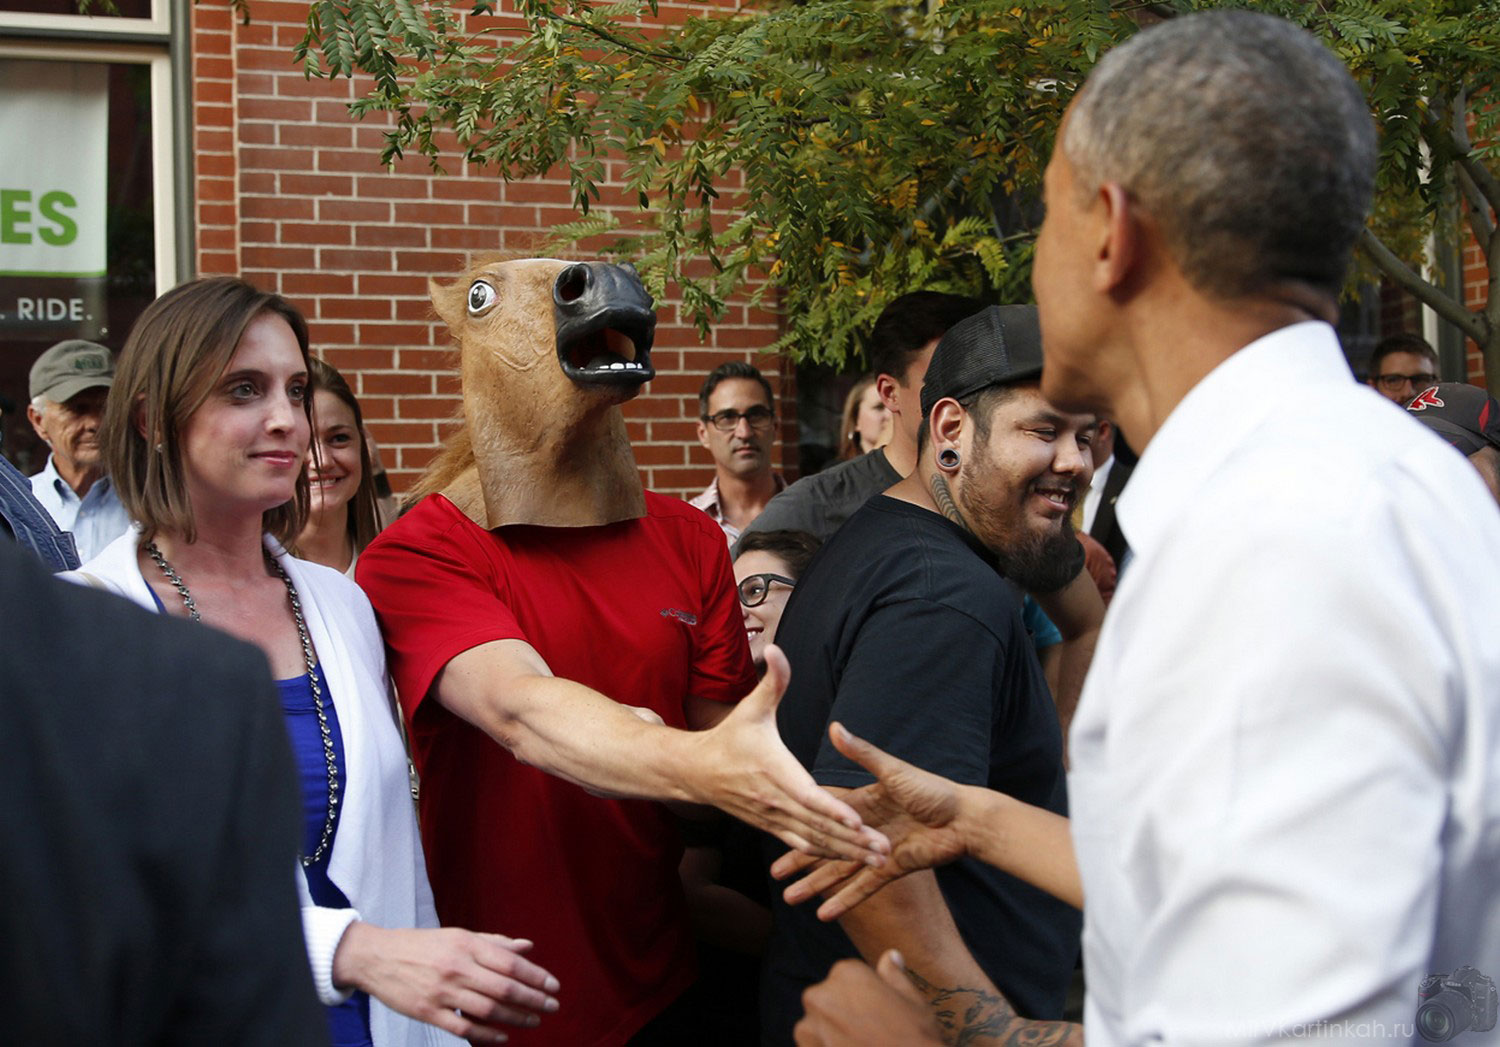 US President Barack Obama greets a man wearing a horse mask during a walkabout in Denver on July 8.